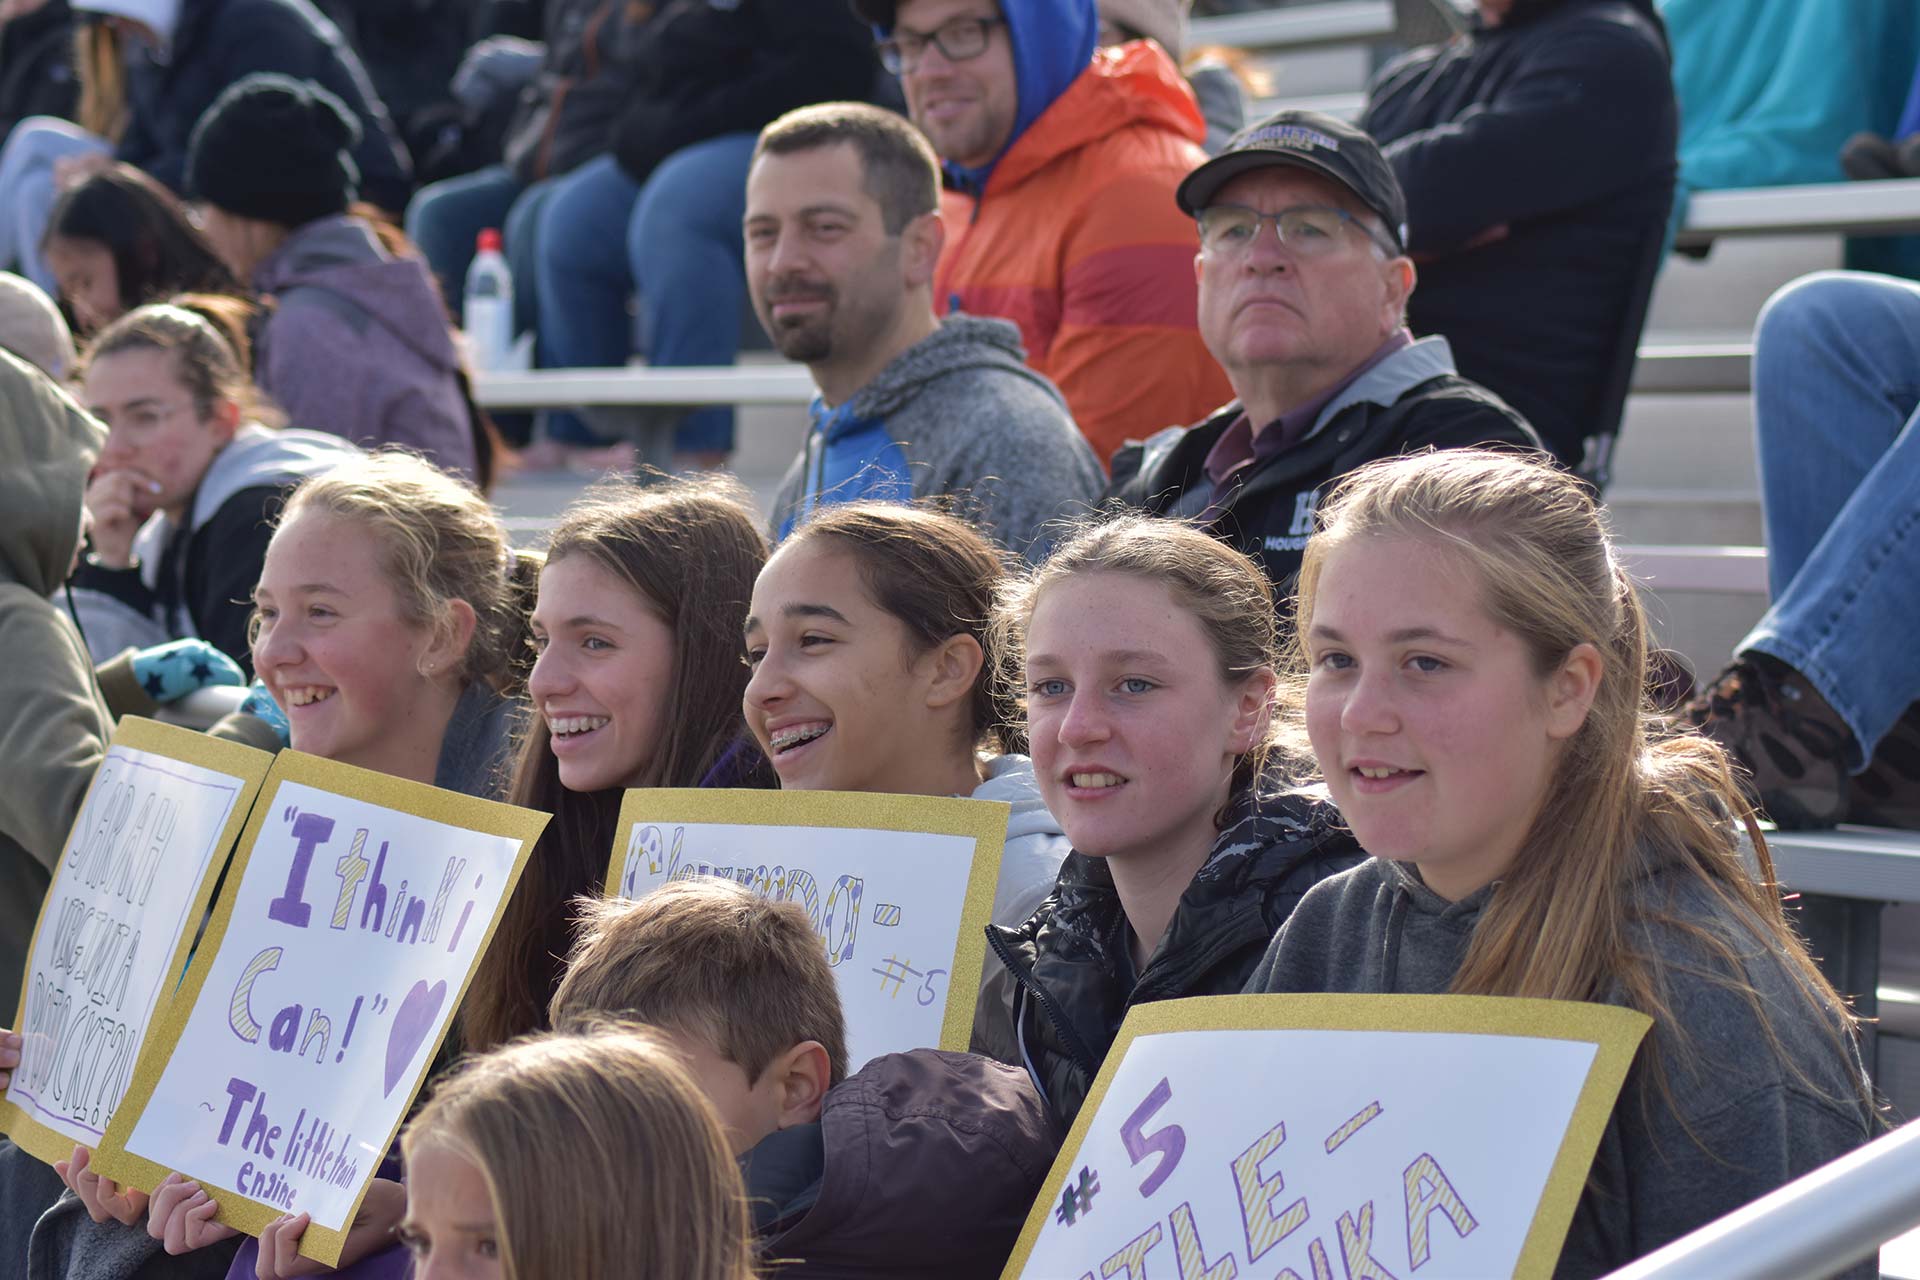 A group of young girls sitting together with signs at a sporting event during homecoming weekend at Houghton.